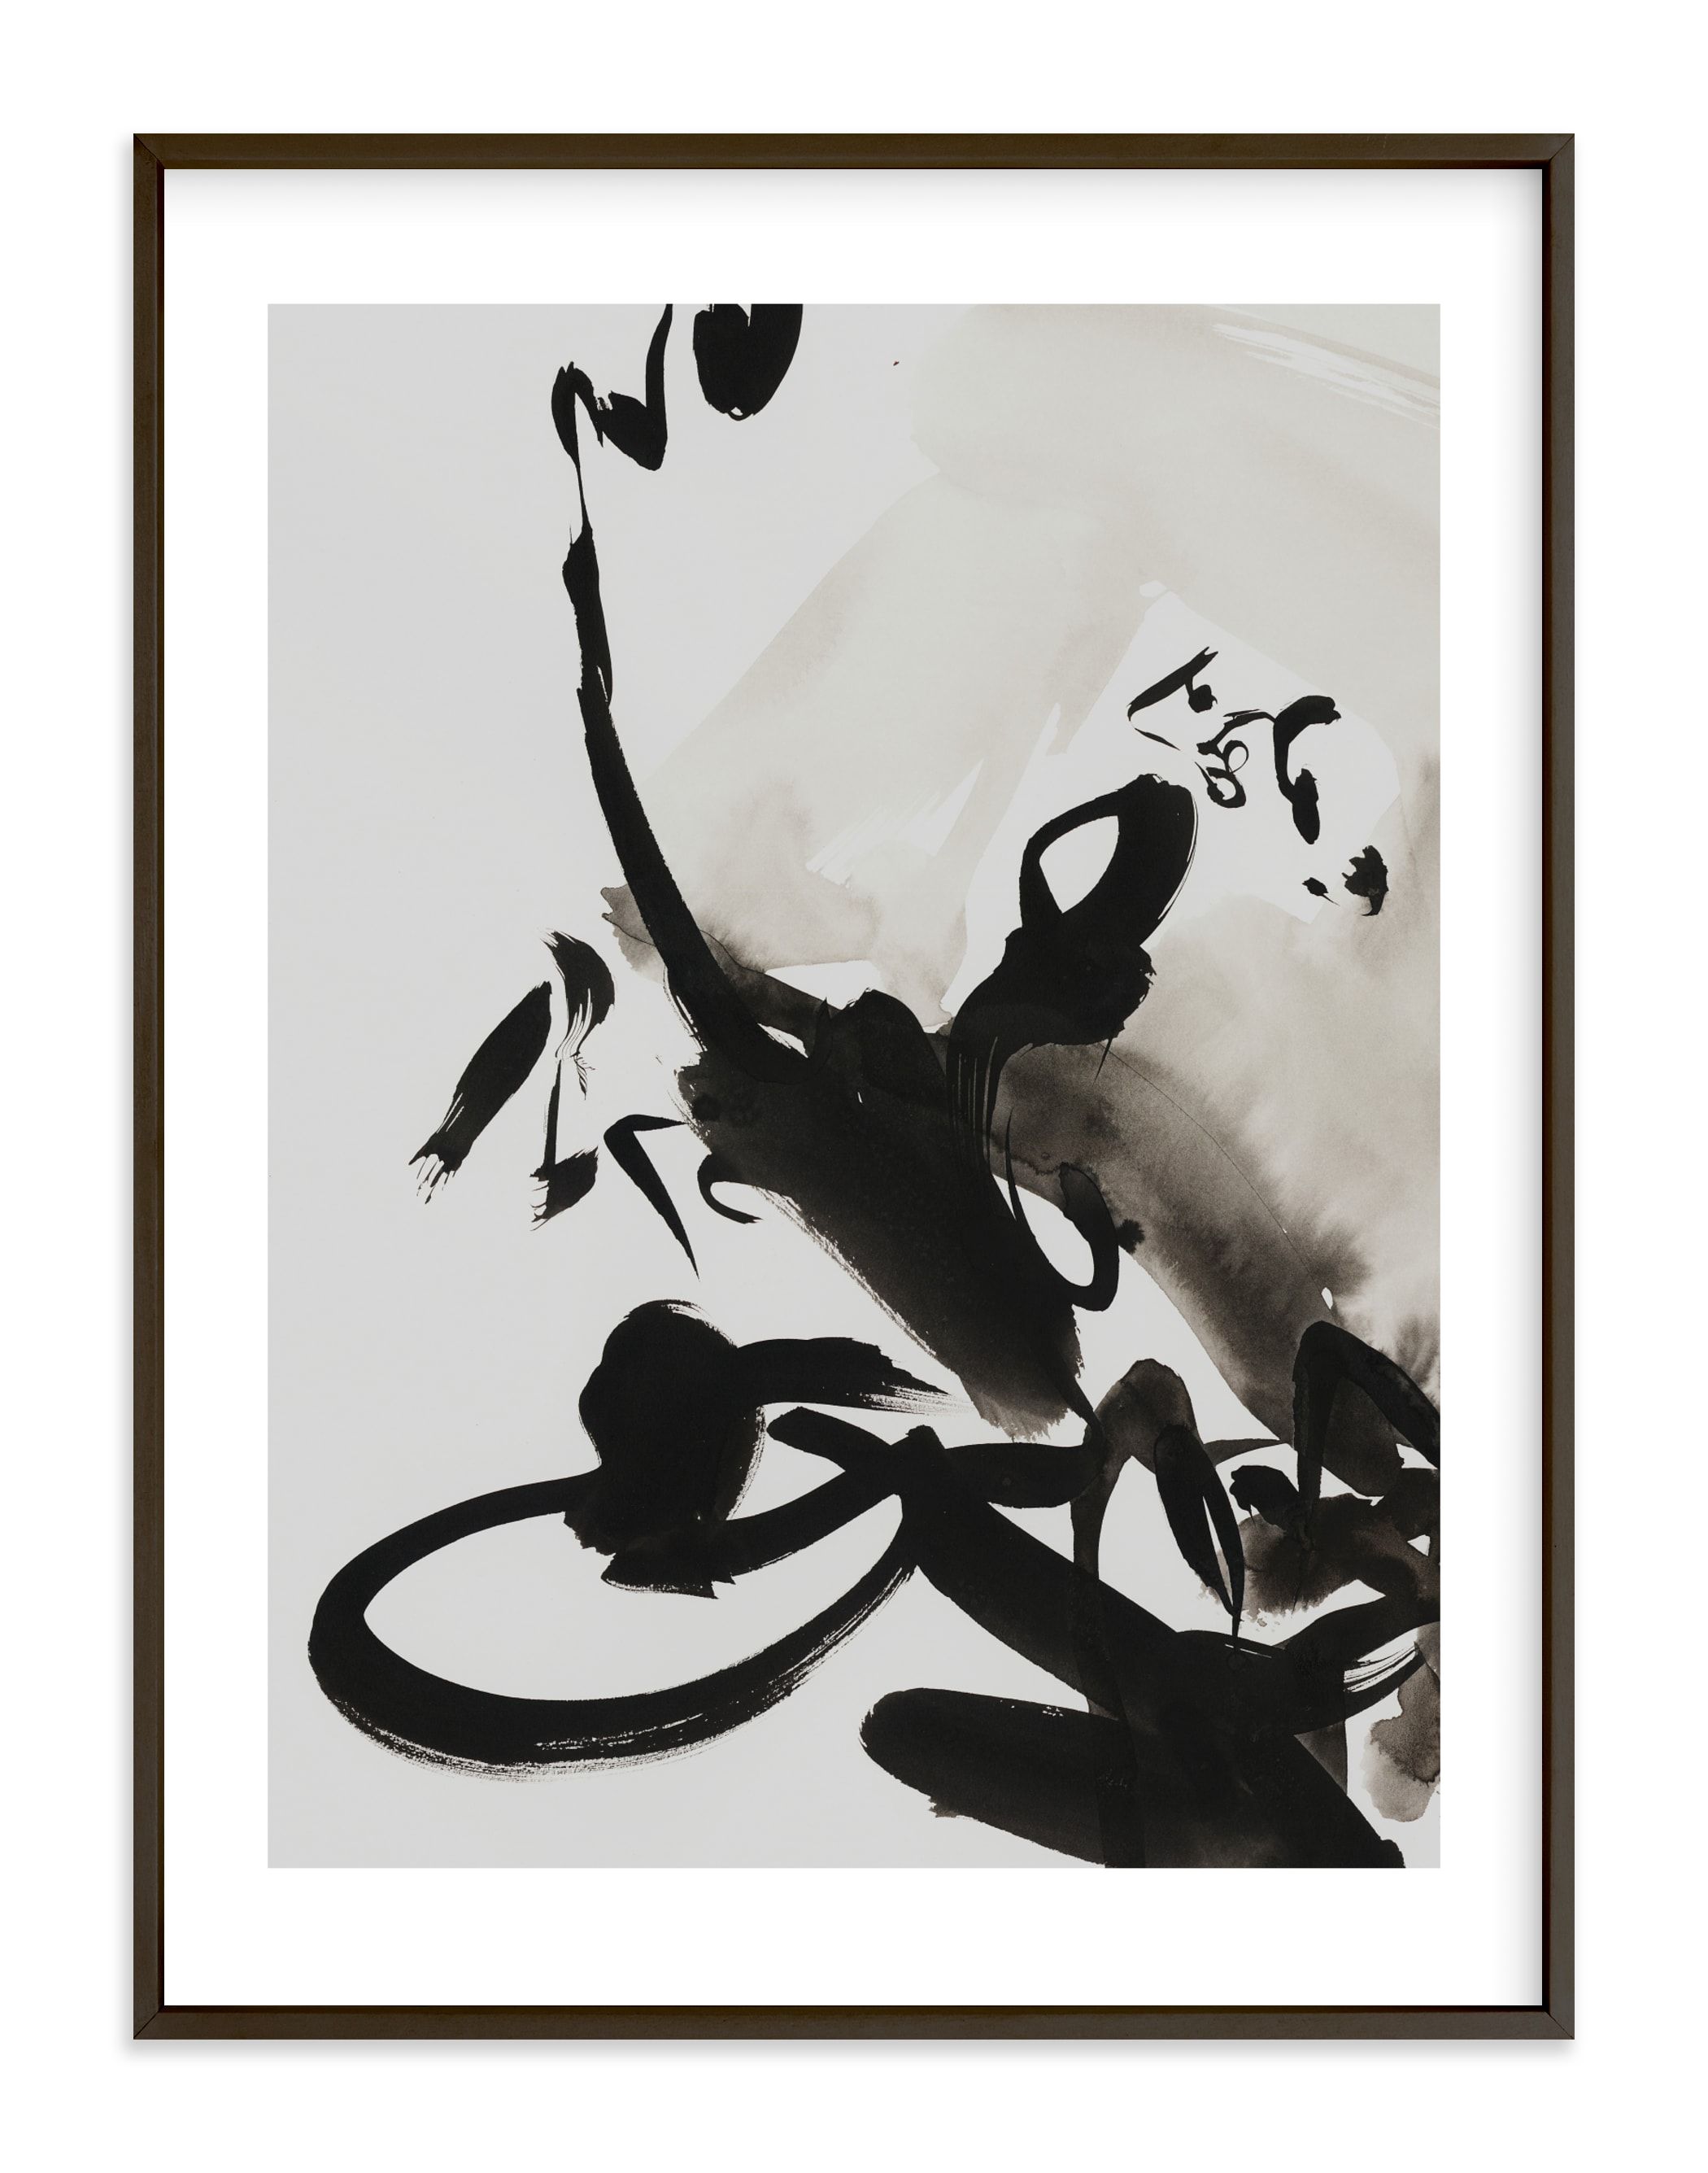 "Ink perspective" - Painting Limited Edition Art Print by Svitlana Martynjuk. | Minted